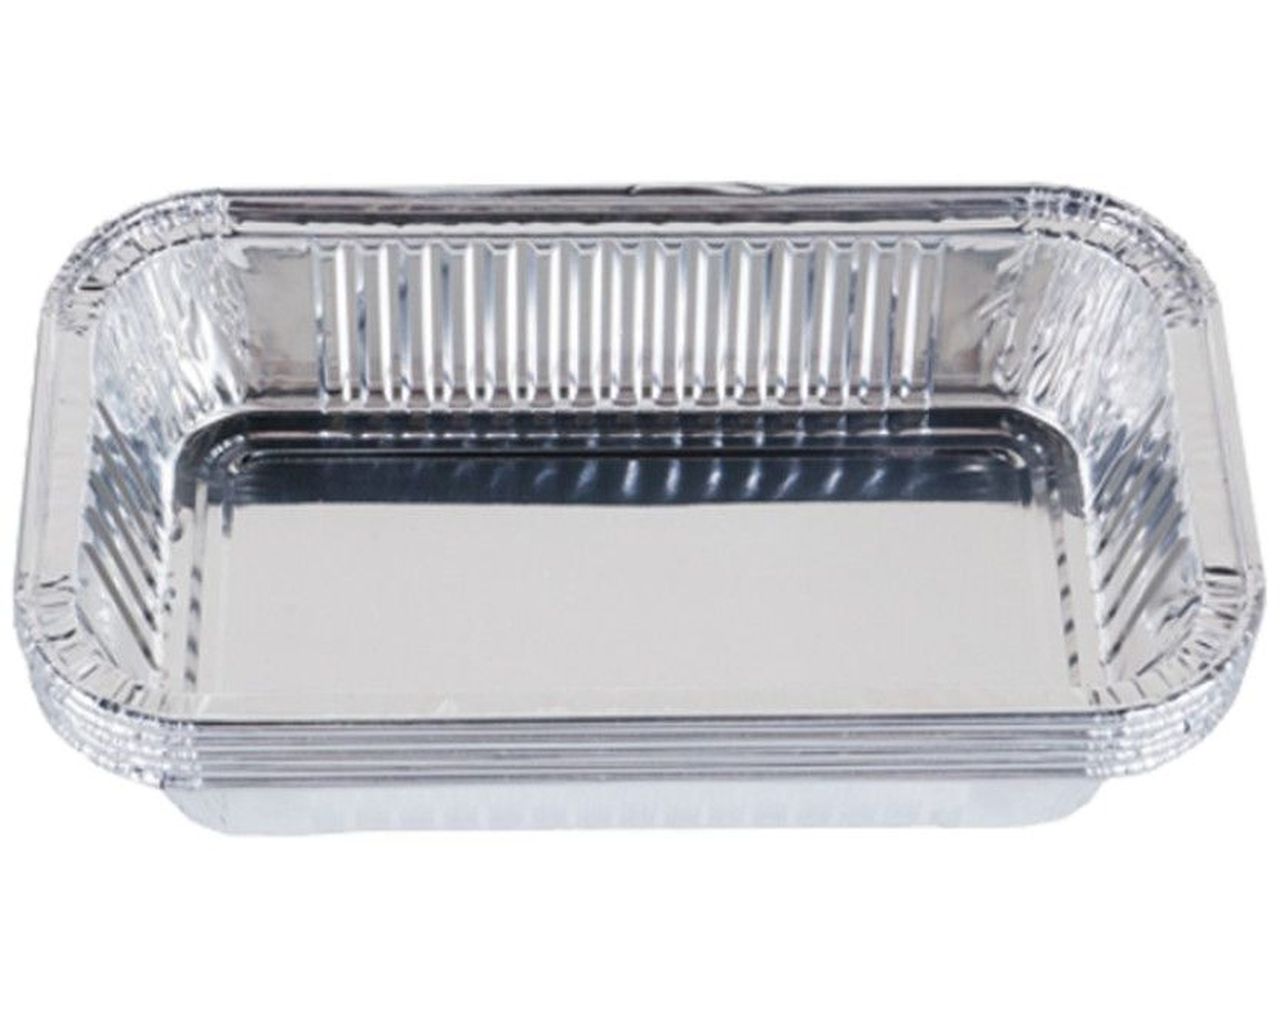 Pro Grill Foil Trays 5 Pack, , hi-res image number null